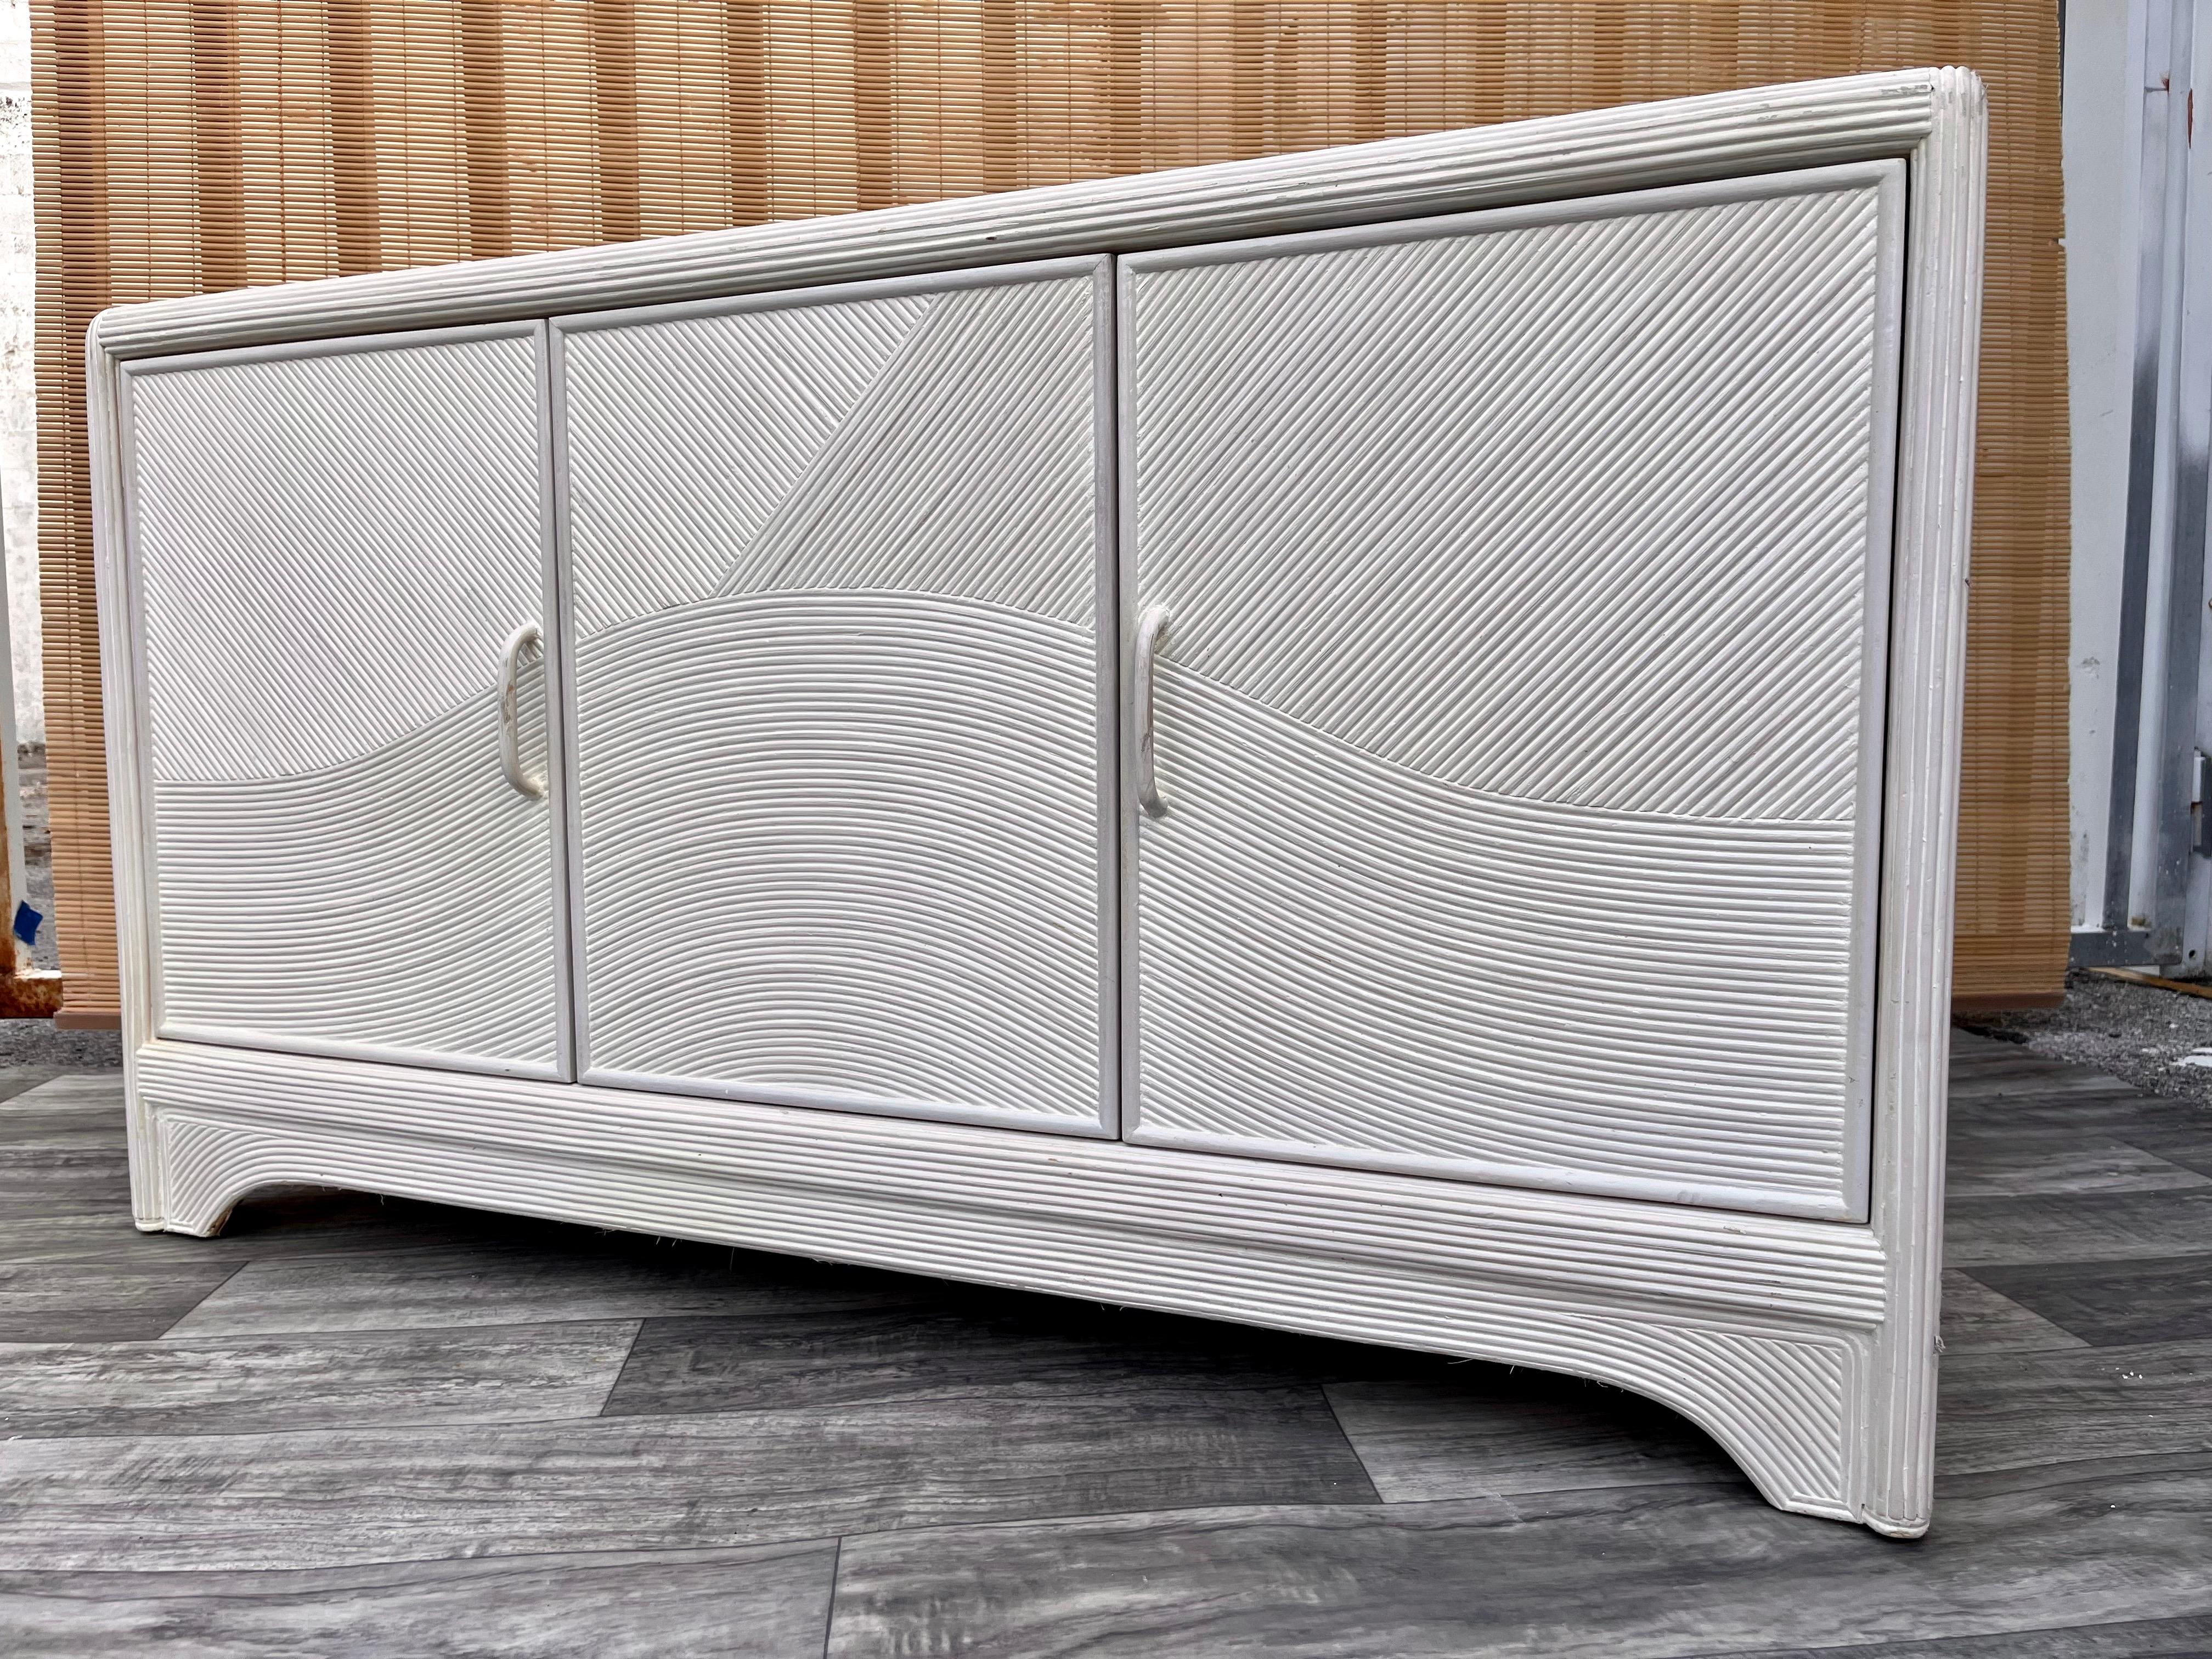 Coastal Style Pencil Reed Sideboard/ Credenza in the Gabriella Crespi Manner 1